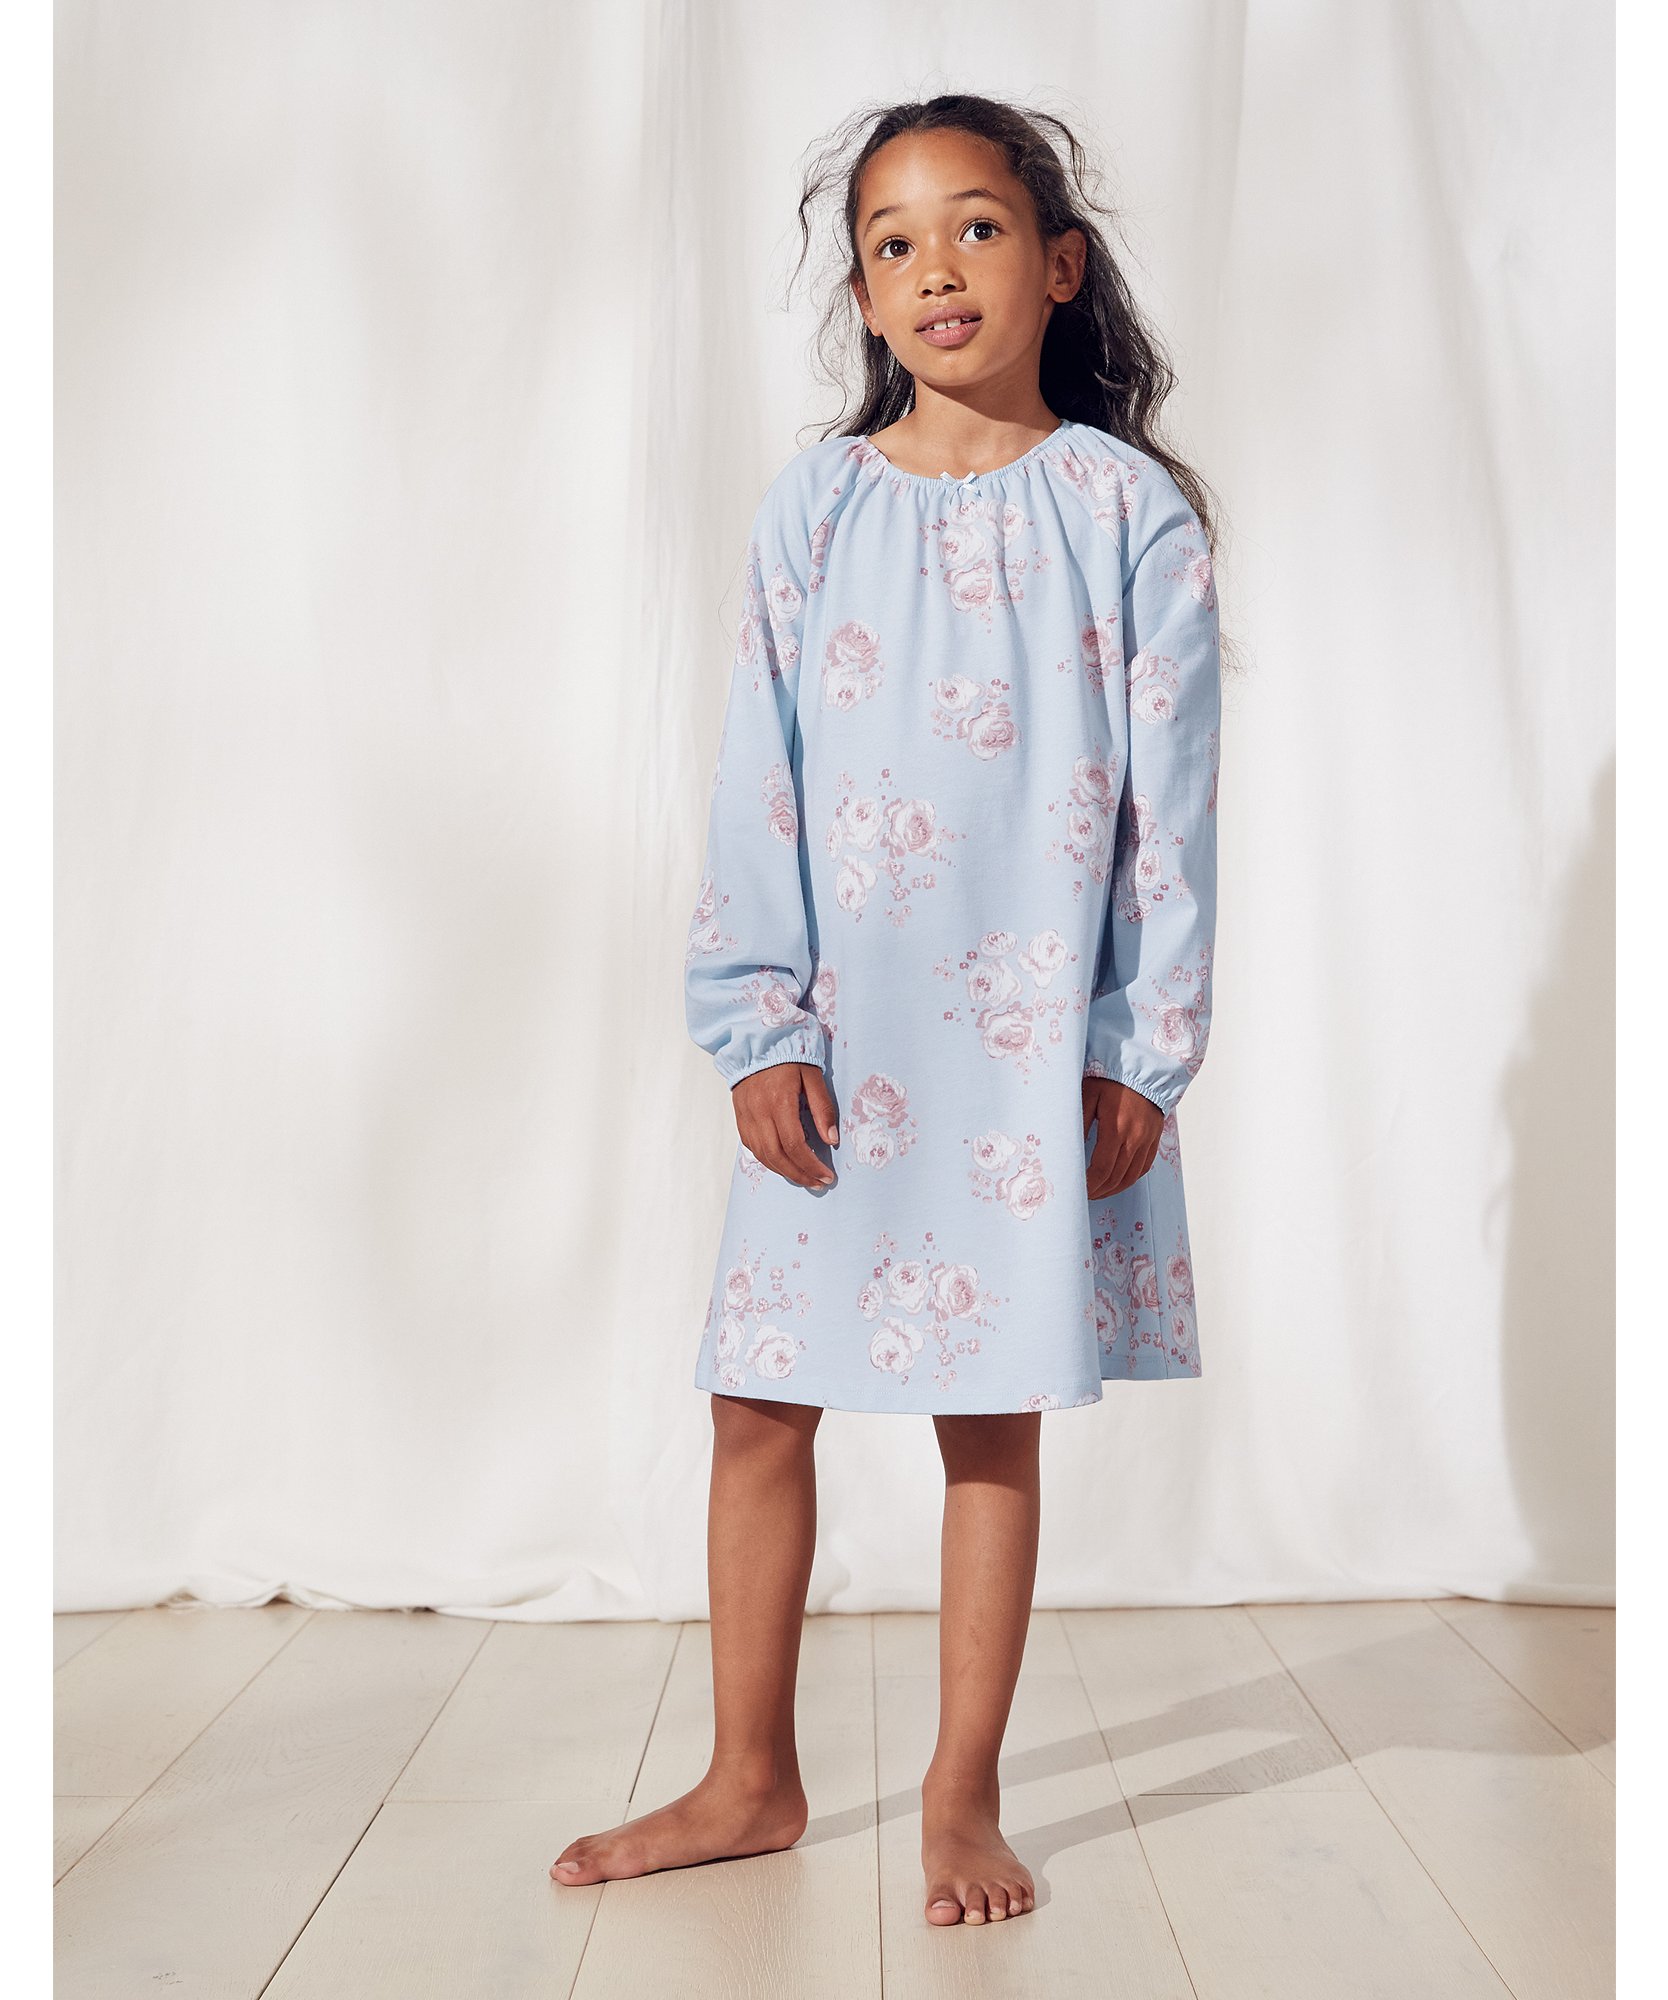 11-12Y 1-12yrs The White Company Clothing Loungewear Nightdresses & Shirts Mirabelle Floral Nightie 